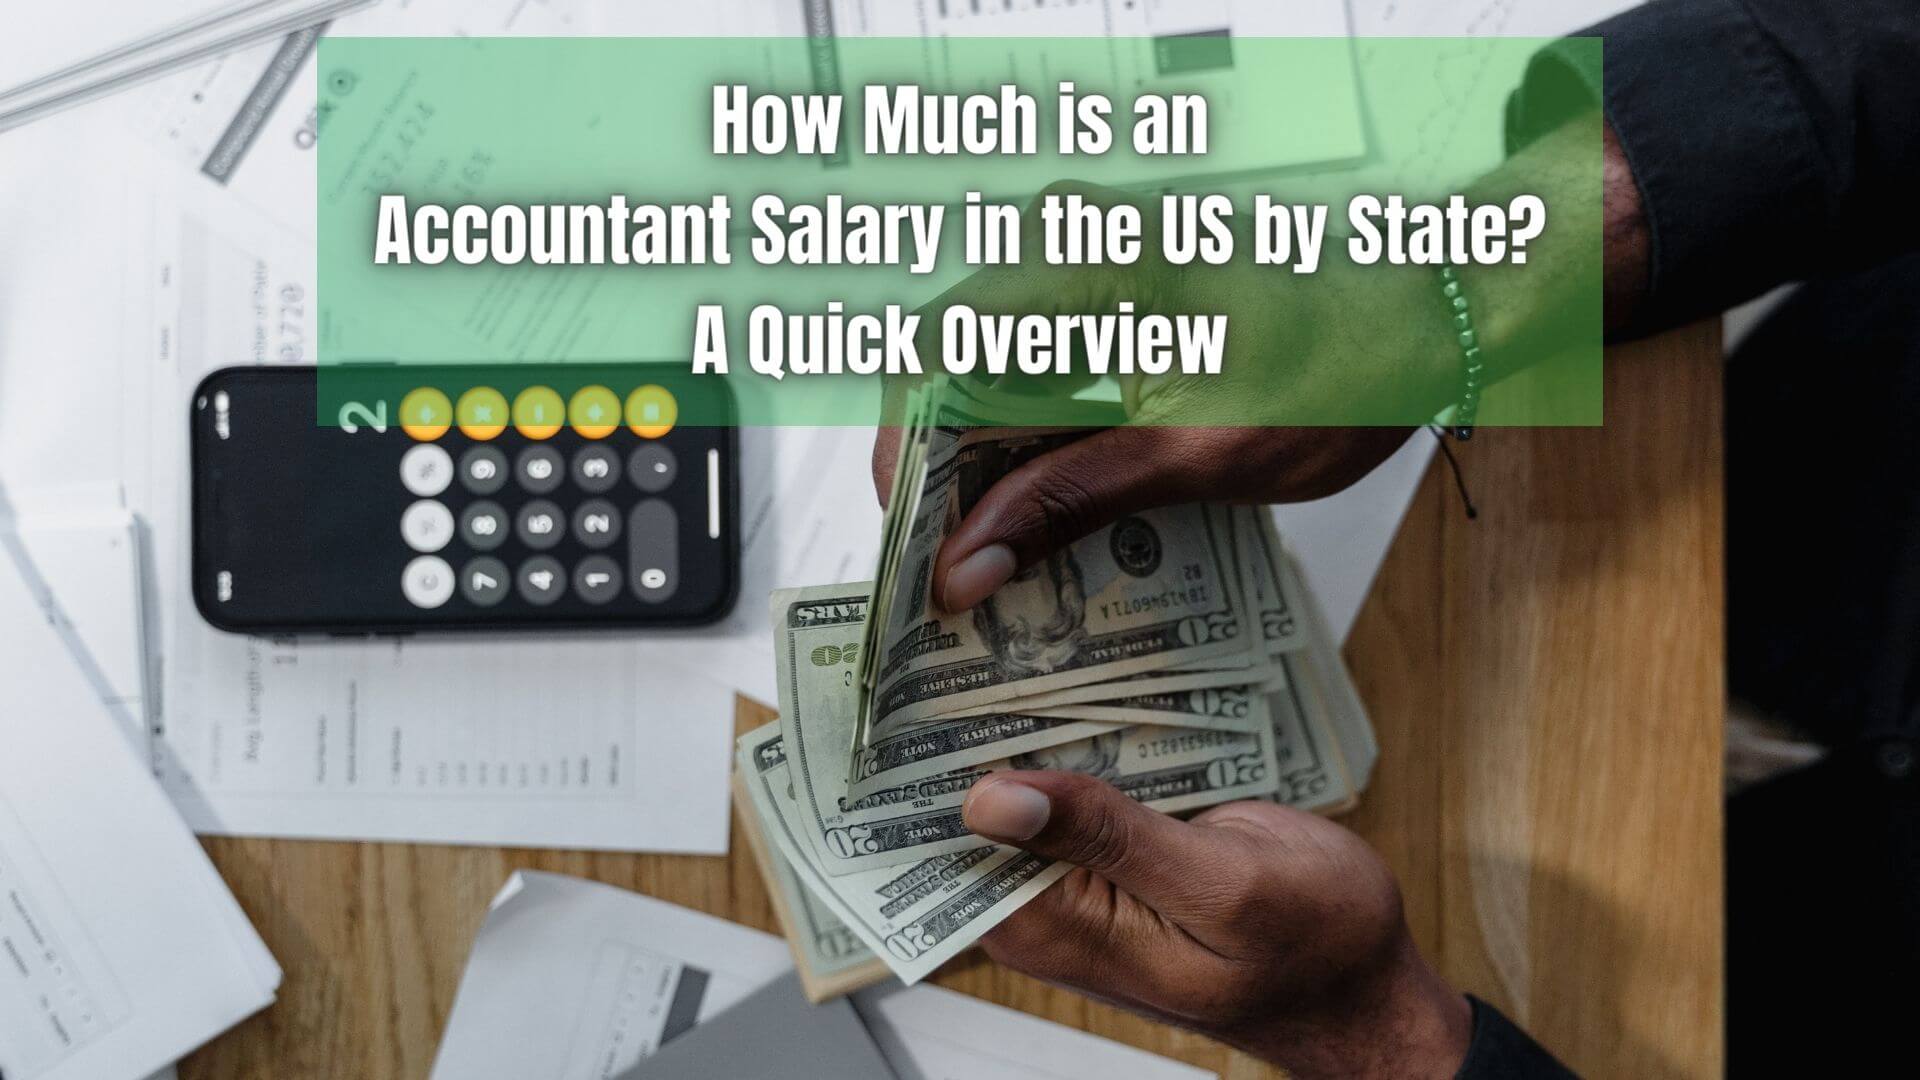 An accountant is a highly sought-after professional in the US, and their salary reflects this demand. Here's how much an accountant earns.